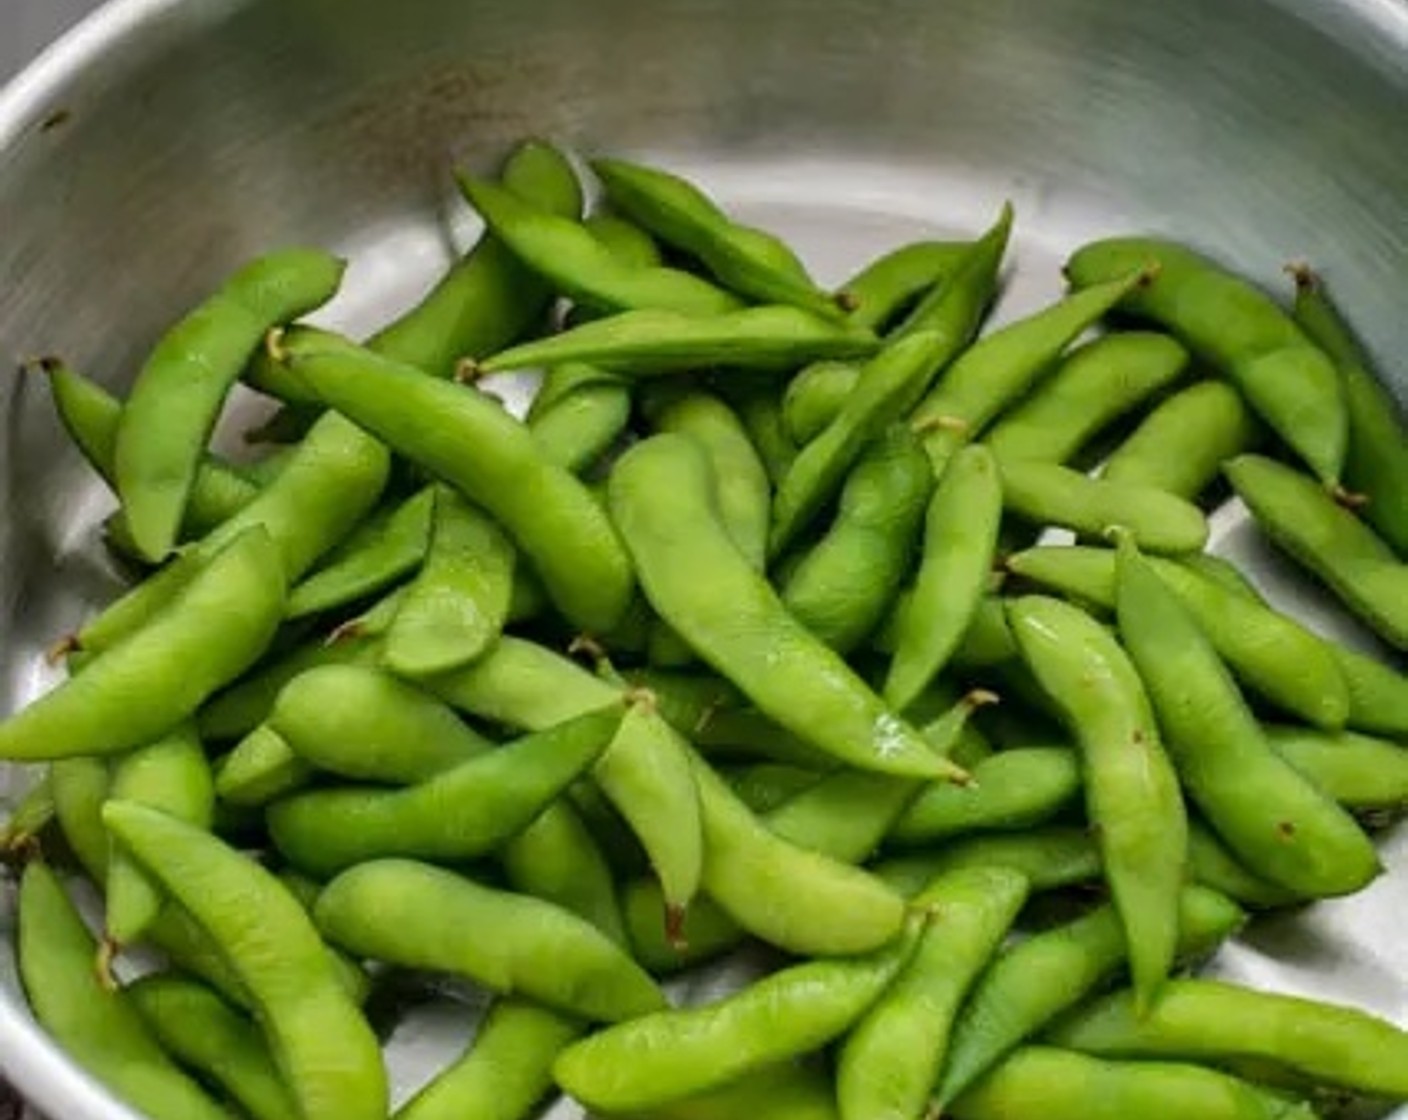 step 4 Heat Cooking Oil (1 Tbsp) in a frying pan over medium-high heat. Add the edamame to the pan, stir-fry for about 1 minute.